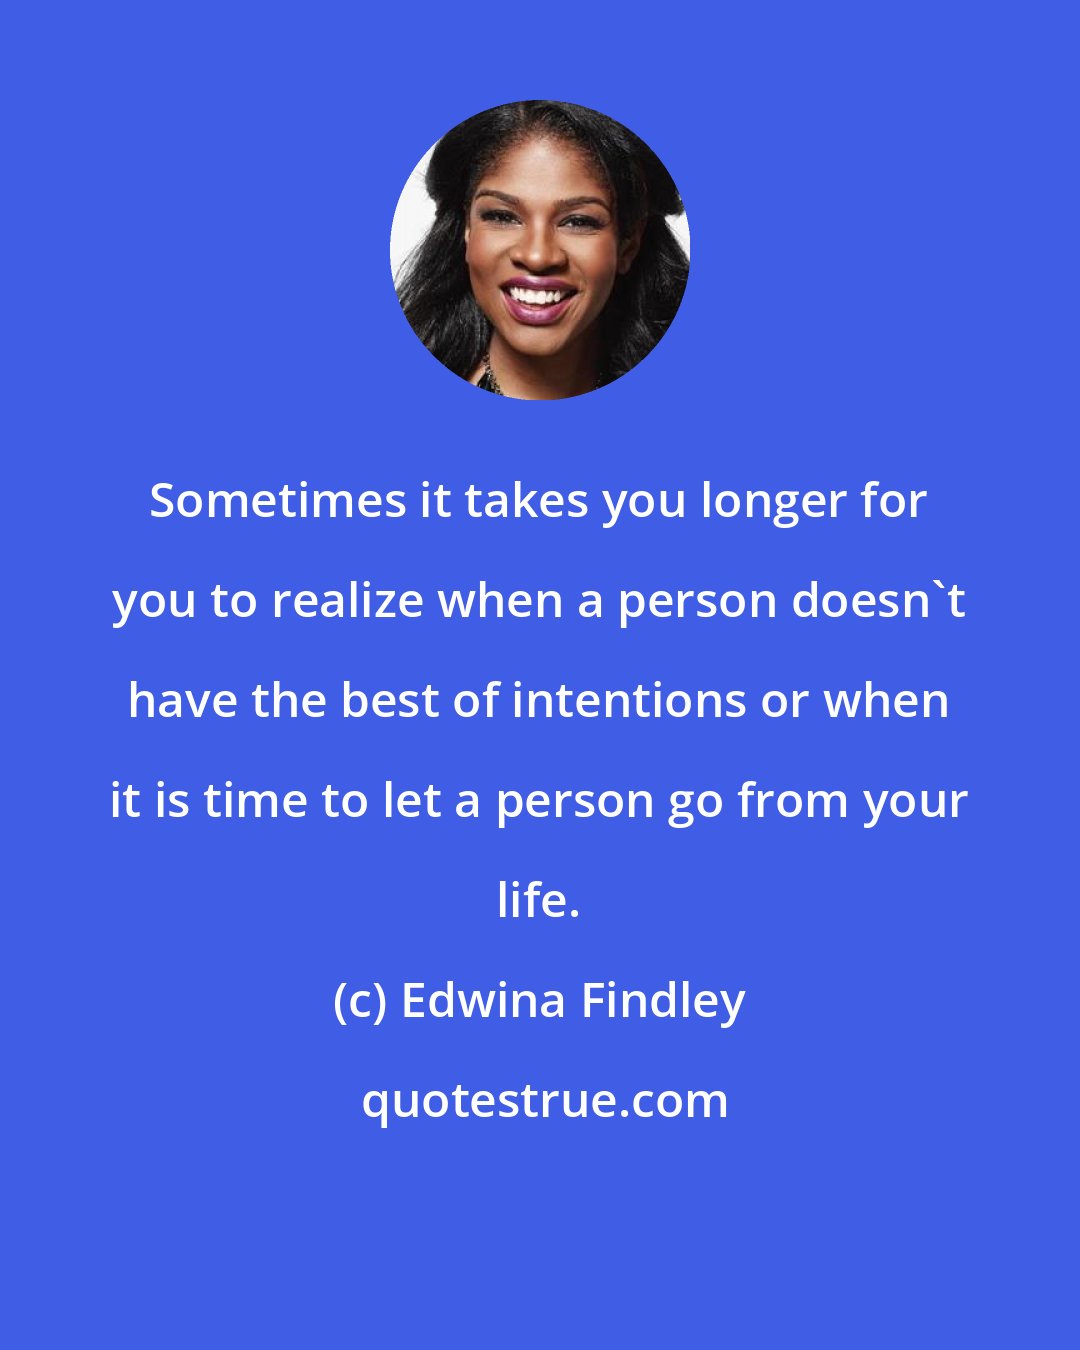 Edwina Findley: Sometimes it takes you longer for you to realize when a person doesn't have the best of intentions or when it is time to let a person go from your life.